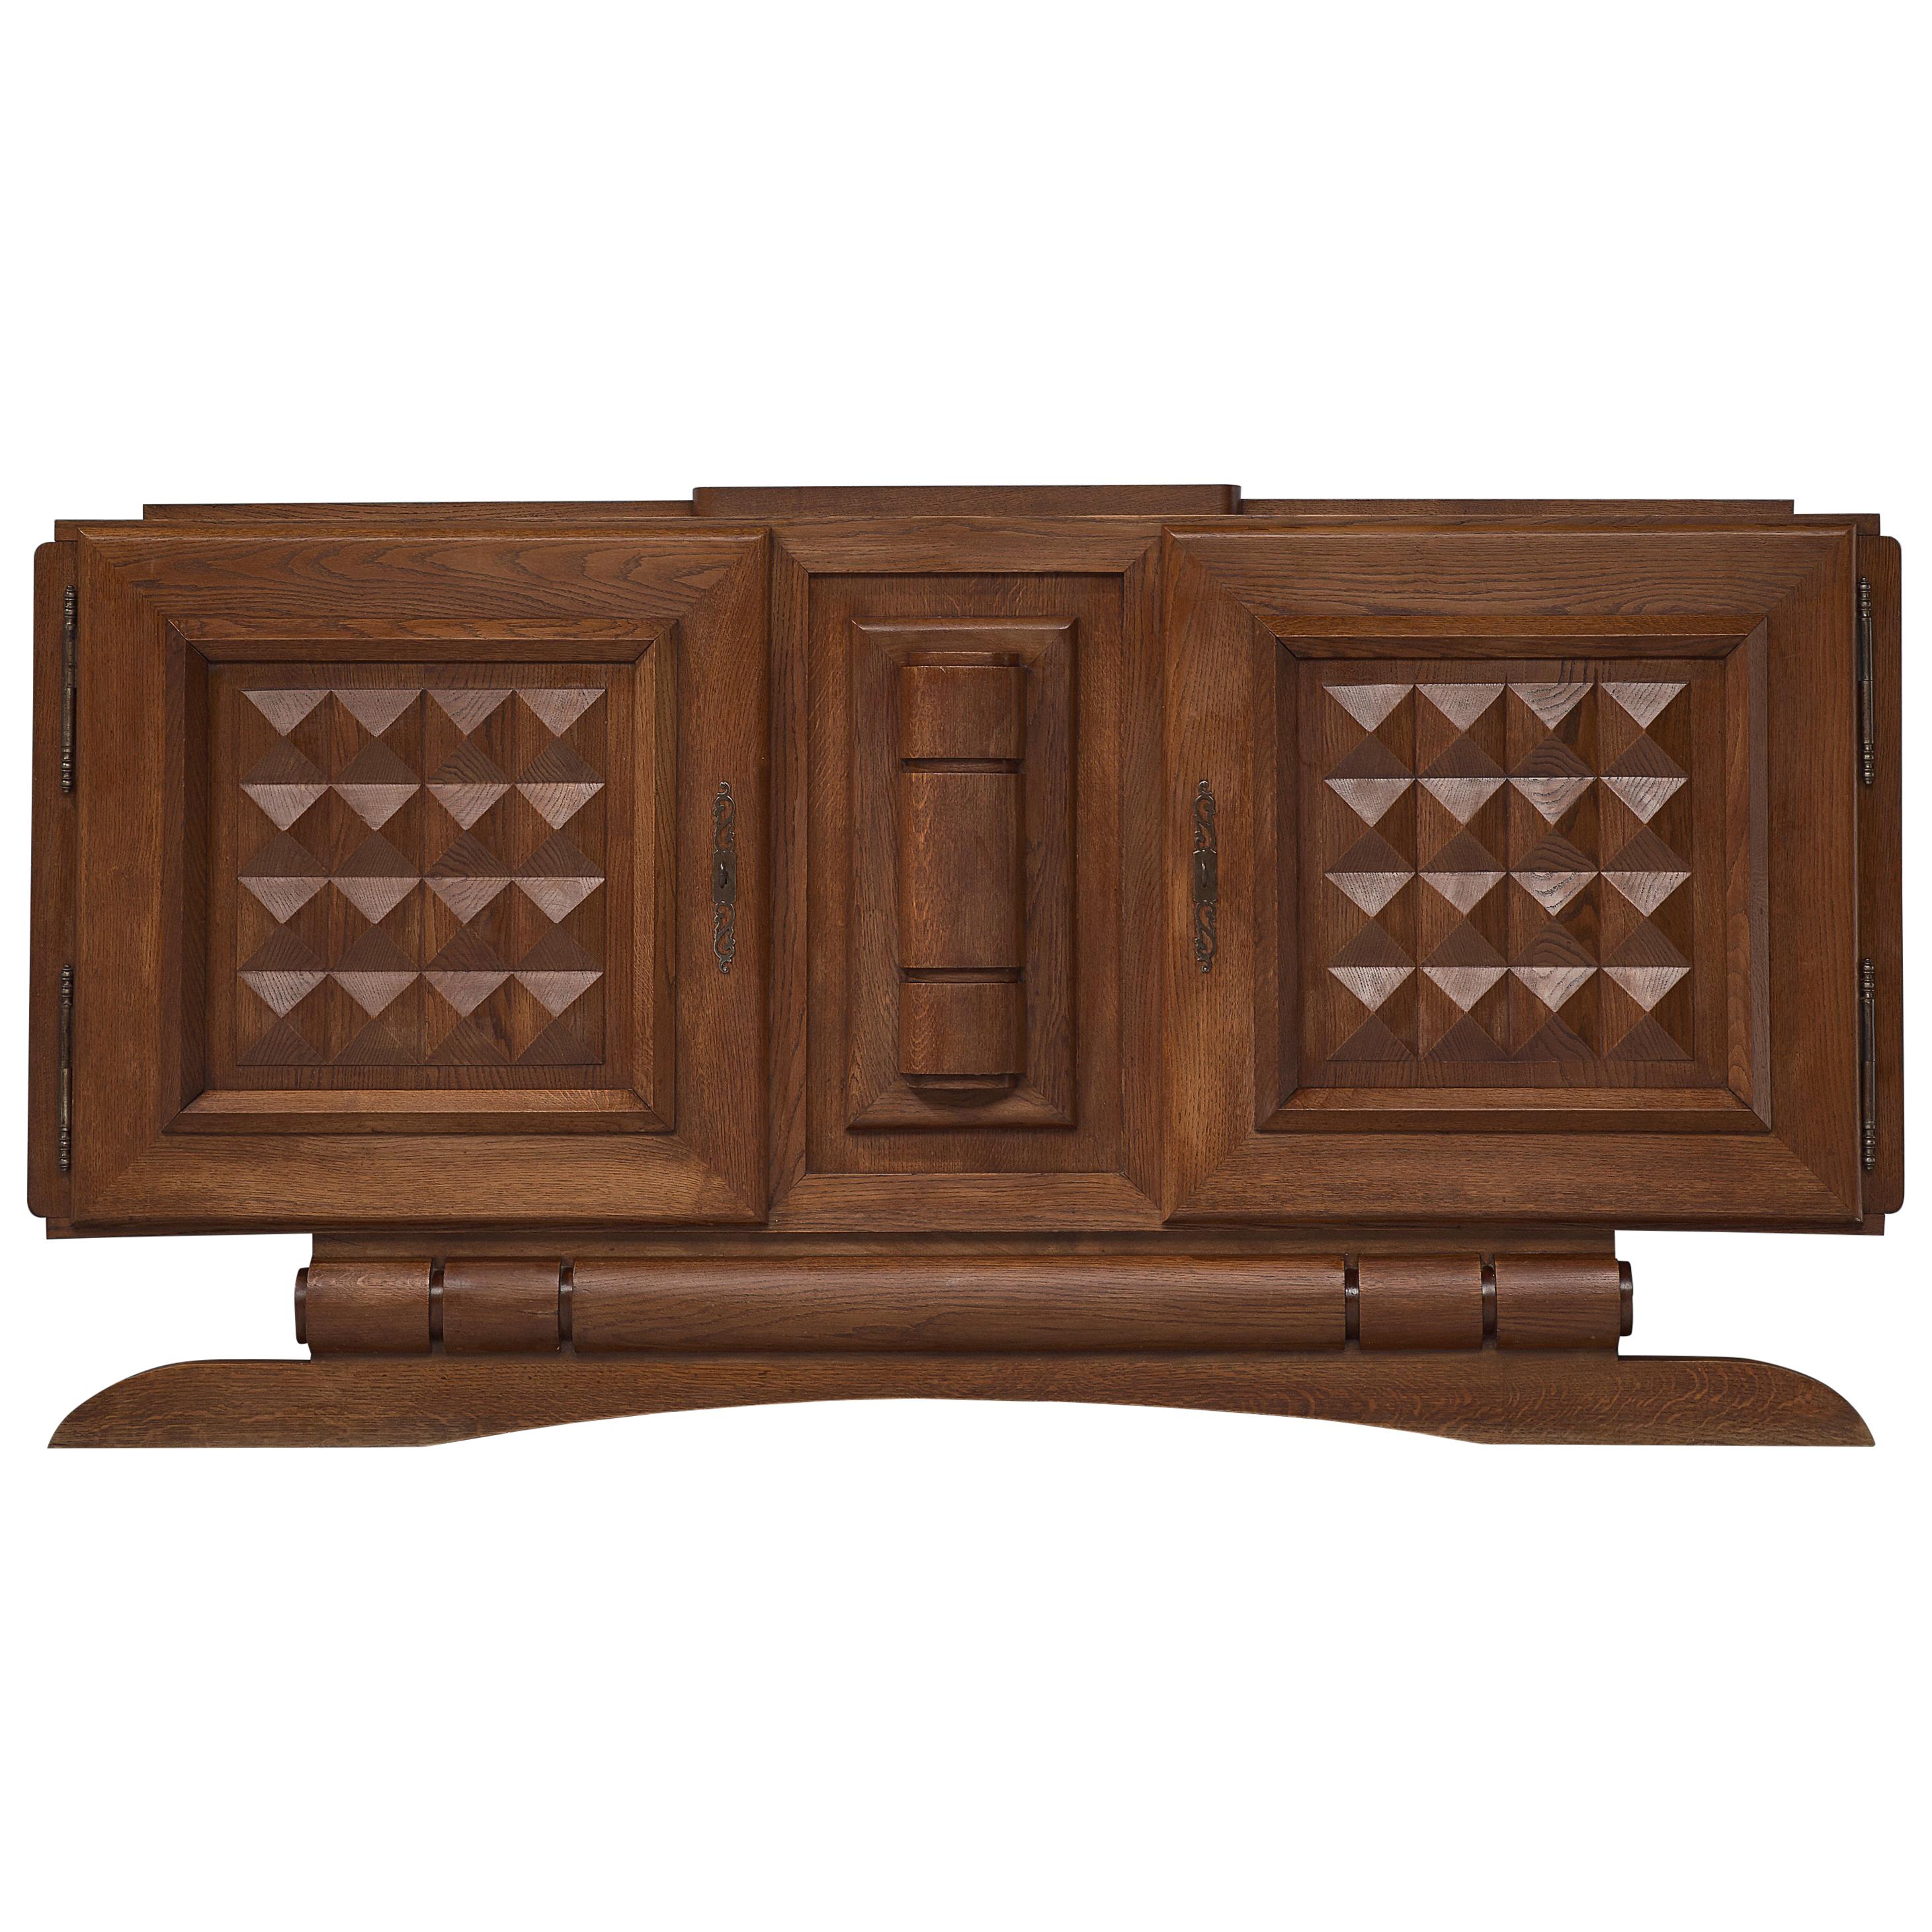 French Art Deco Credenza in Stained Oak